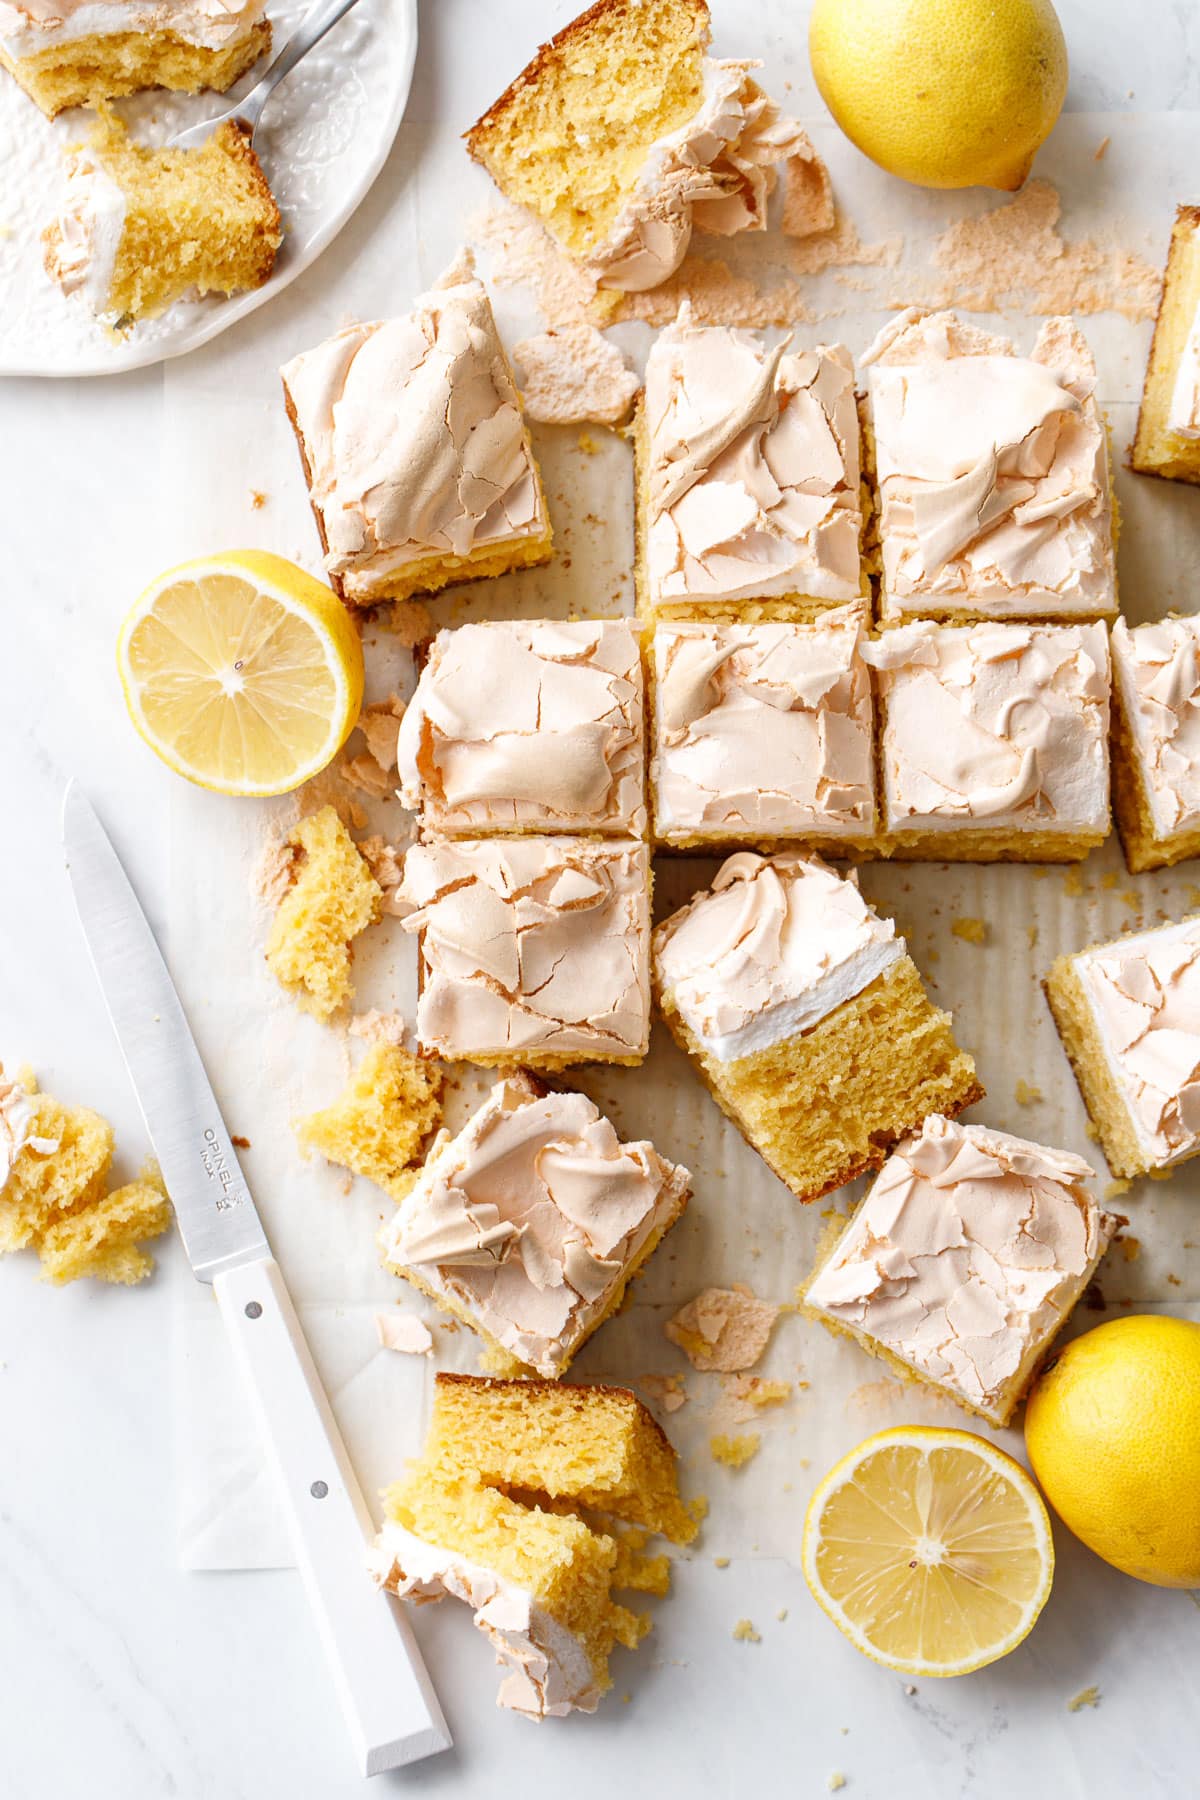 Overhead, messy pieces of Lemon Meringue Butter Cake cut into squares, with lemons (whole and cut in half) and a small knife.